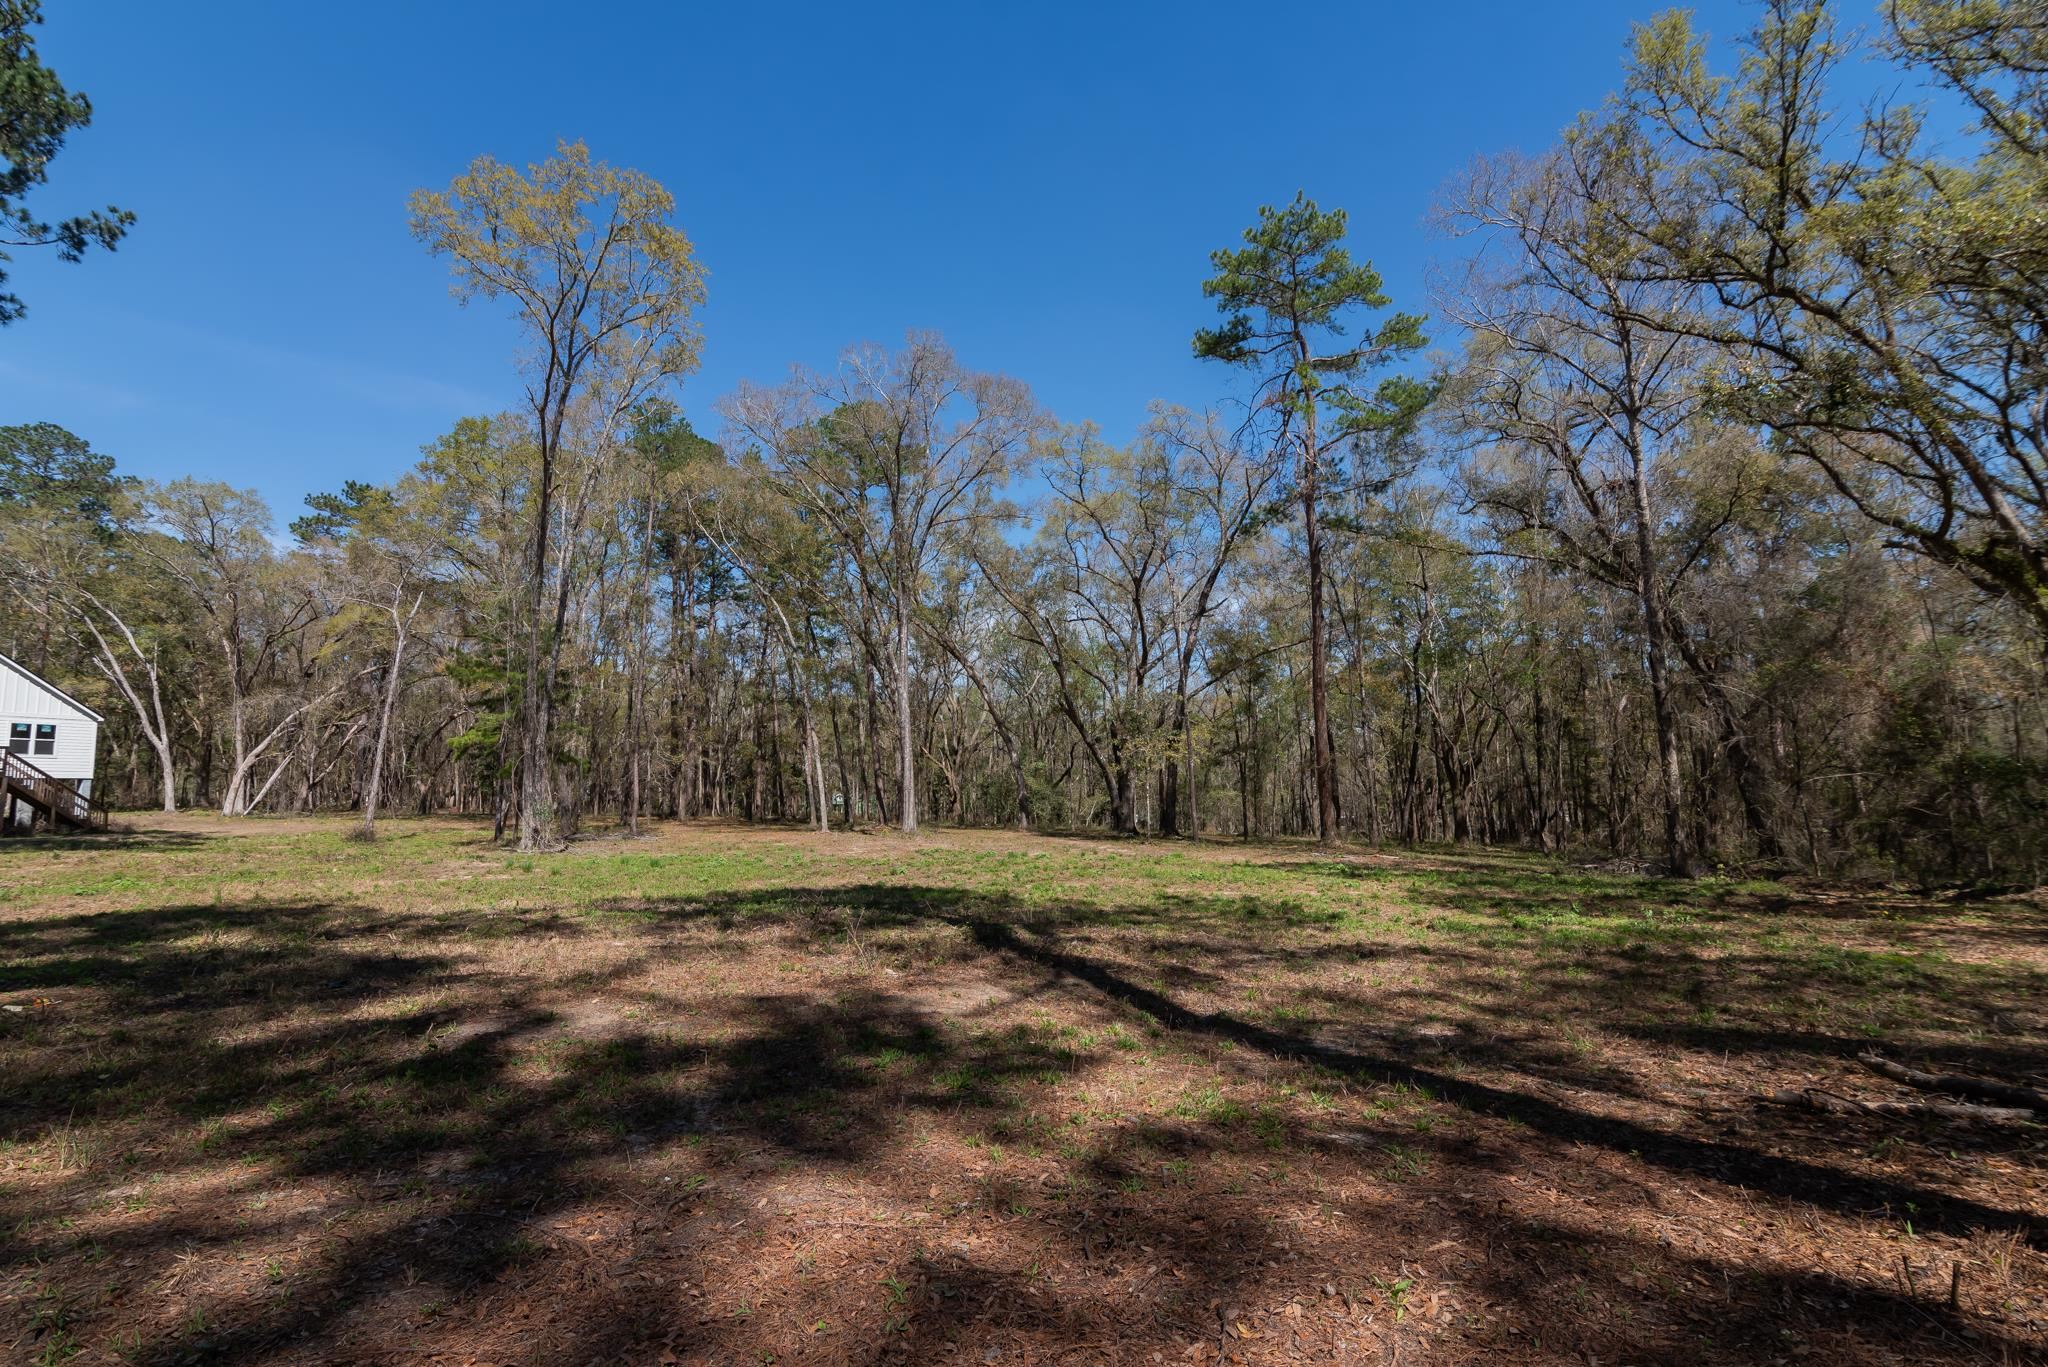 0 Star Gate,TALLAHASSEE,Florida 32308,Lots and land,Star Gate,369800